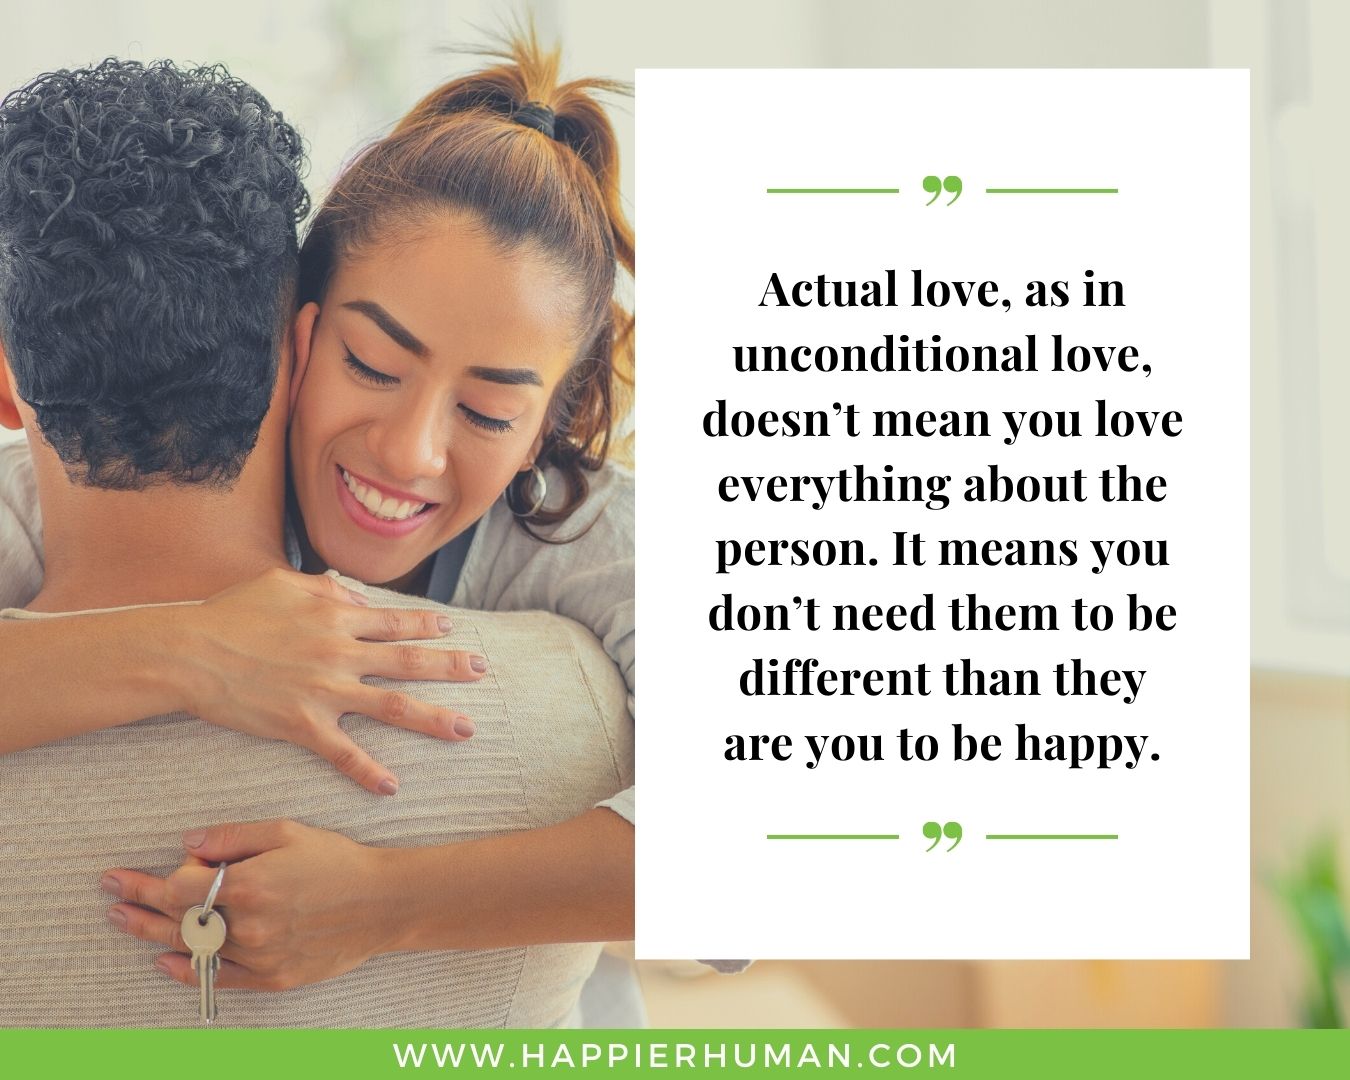 Unconditional Love Quotes for Her - “Actual love, as in unconditional love, doesn’t mean you love everything about the person. It means you don’t need them to be different than they are you to be happy.”